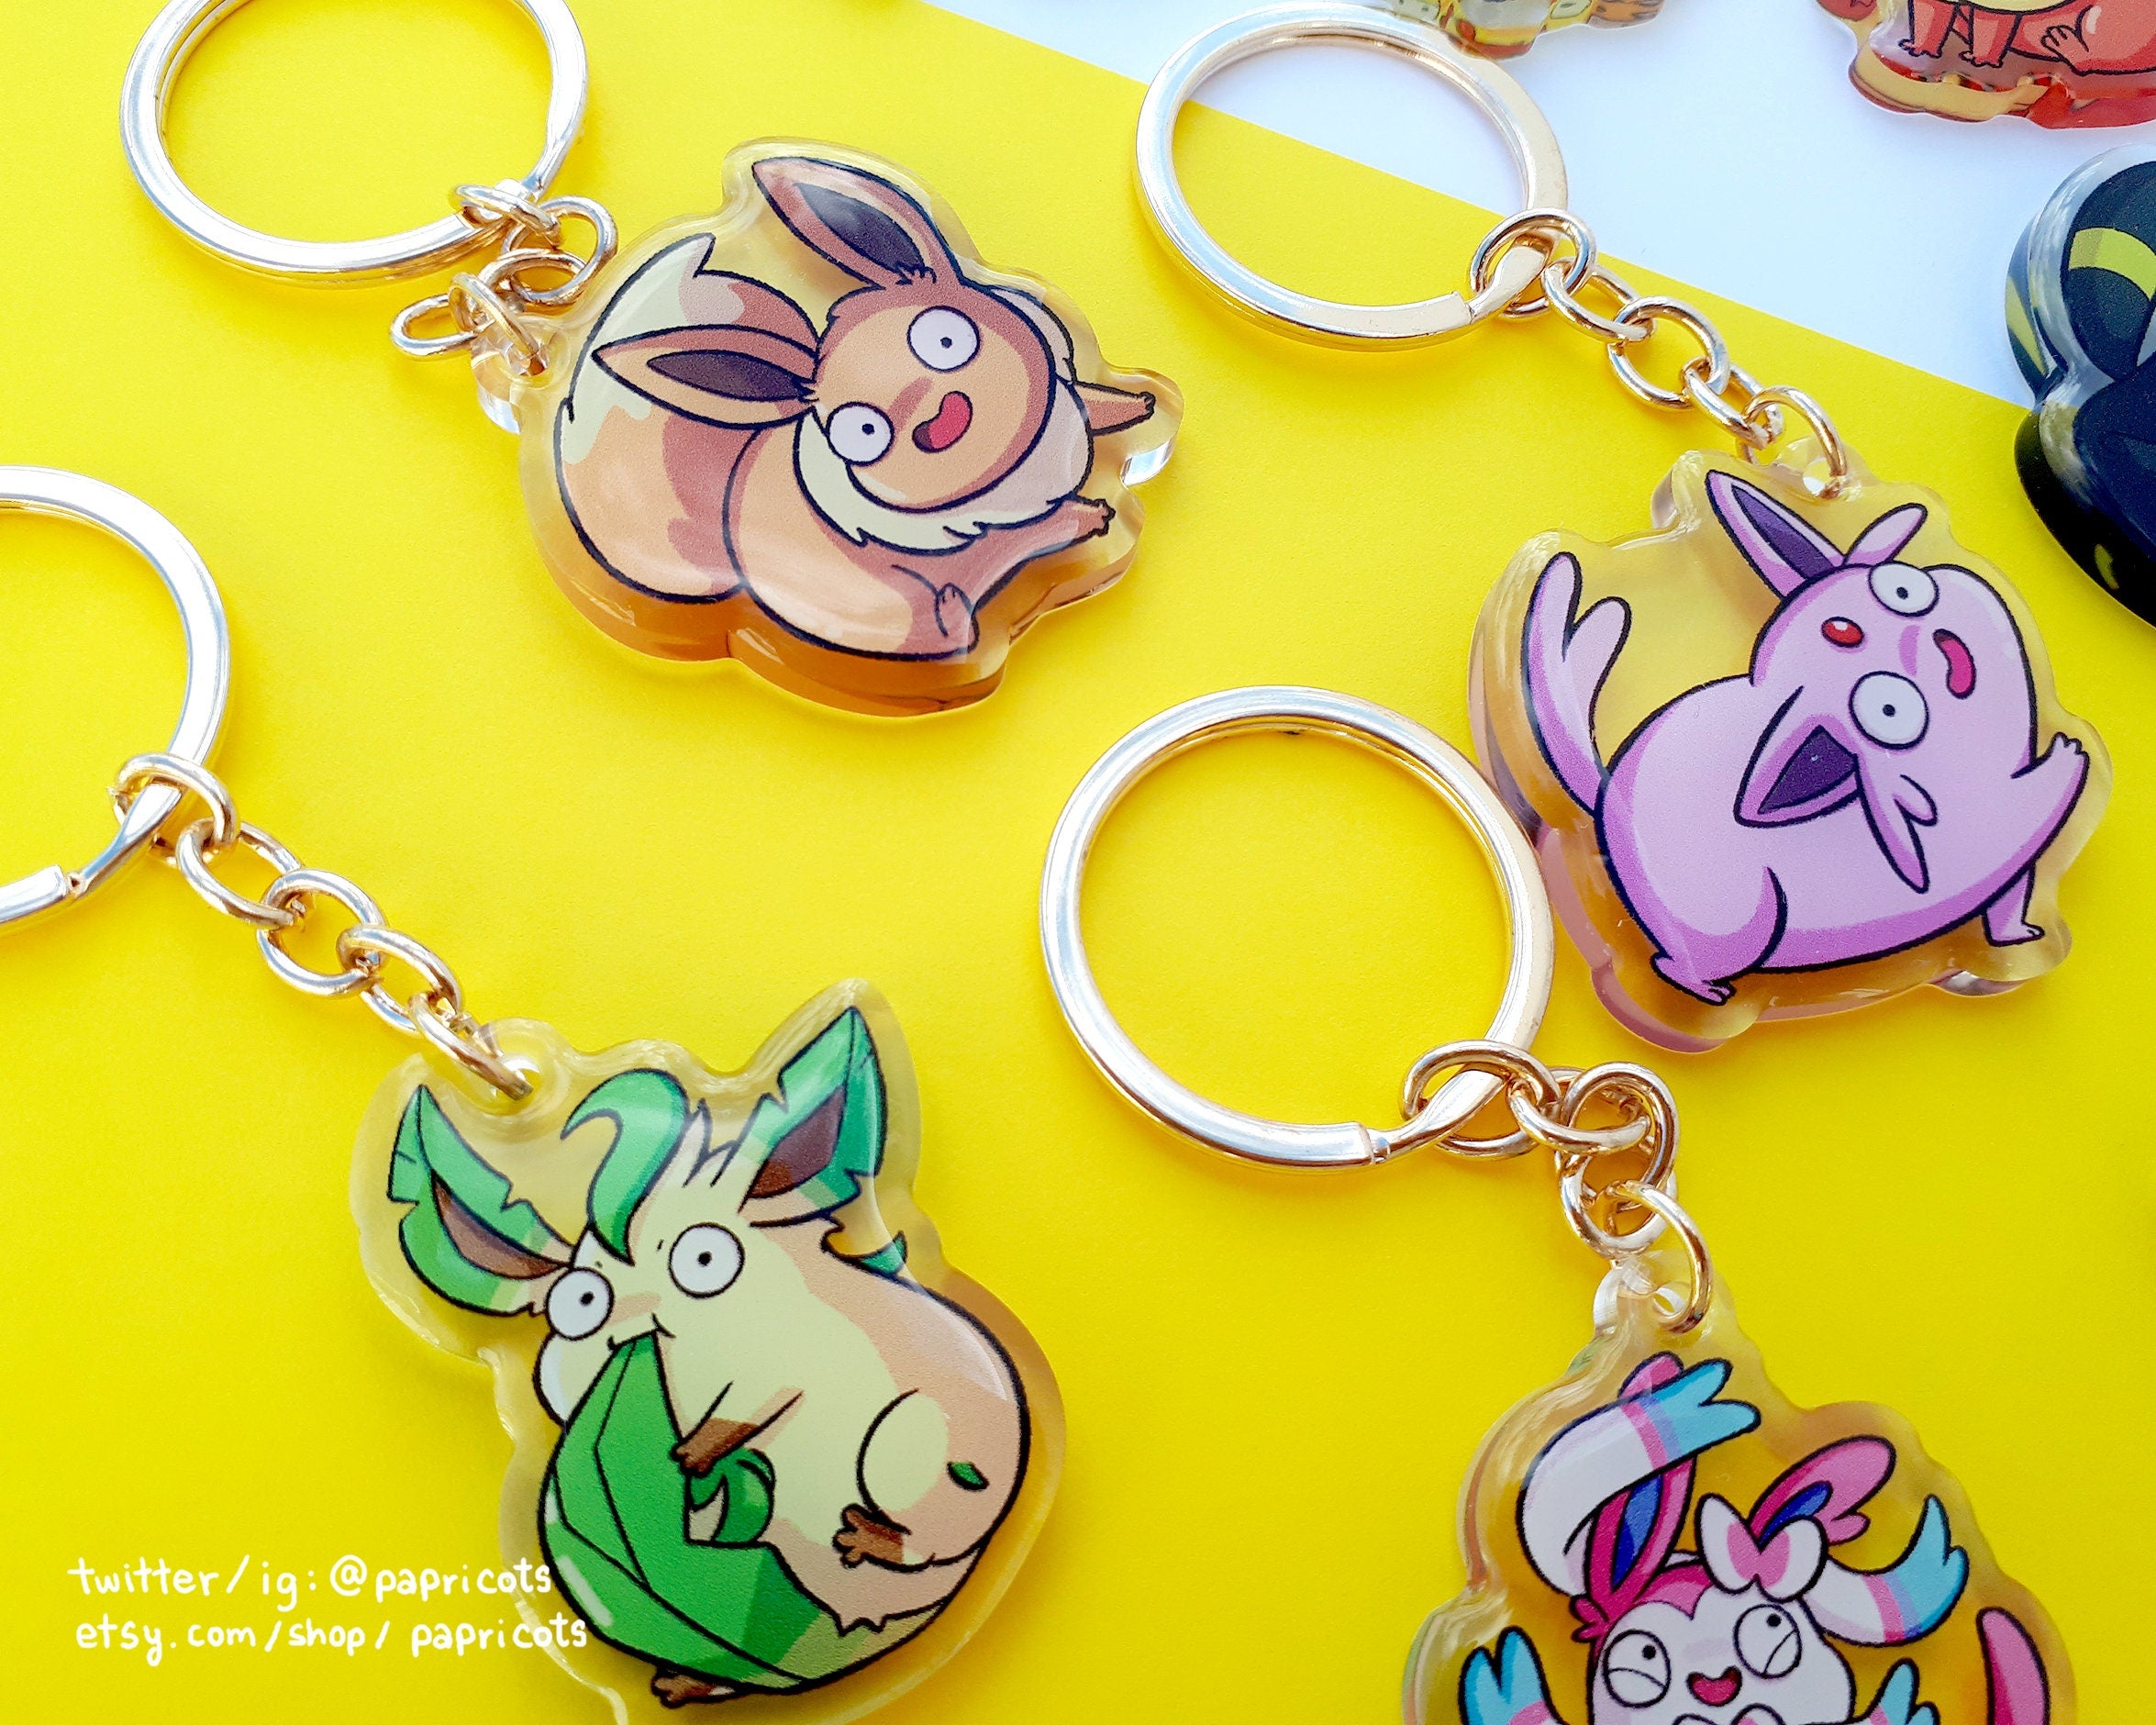 [Papricots] chubby eeveelutions keychains